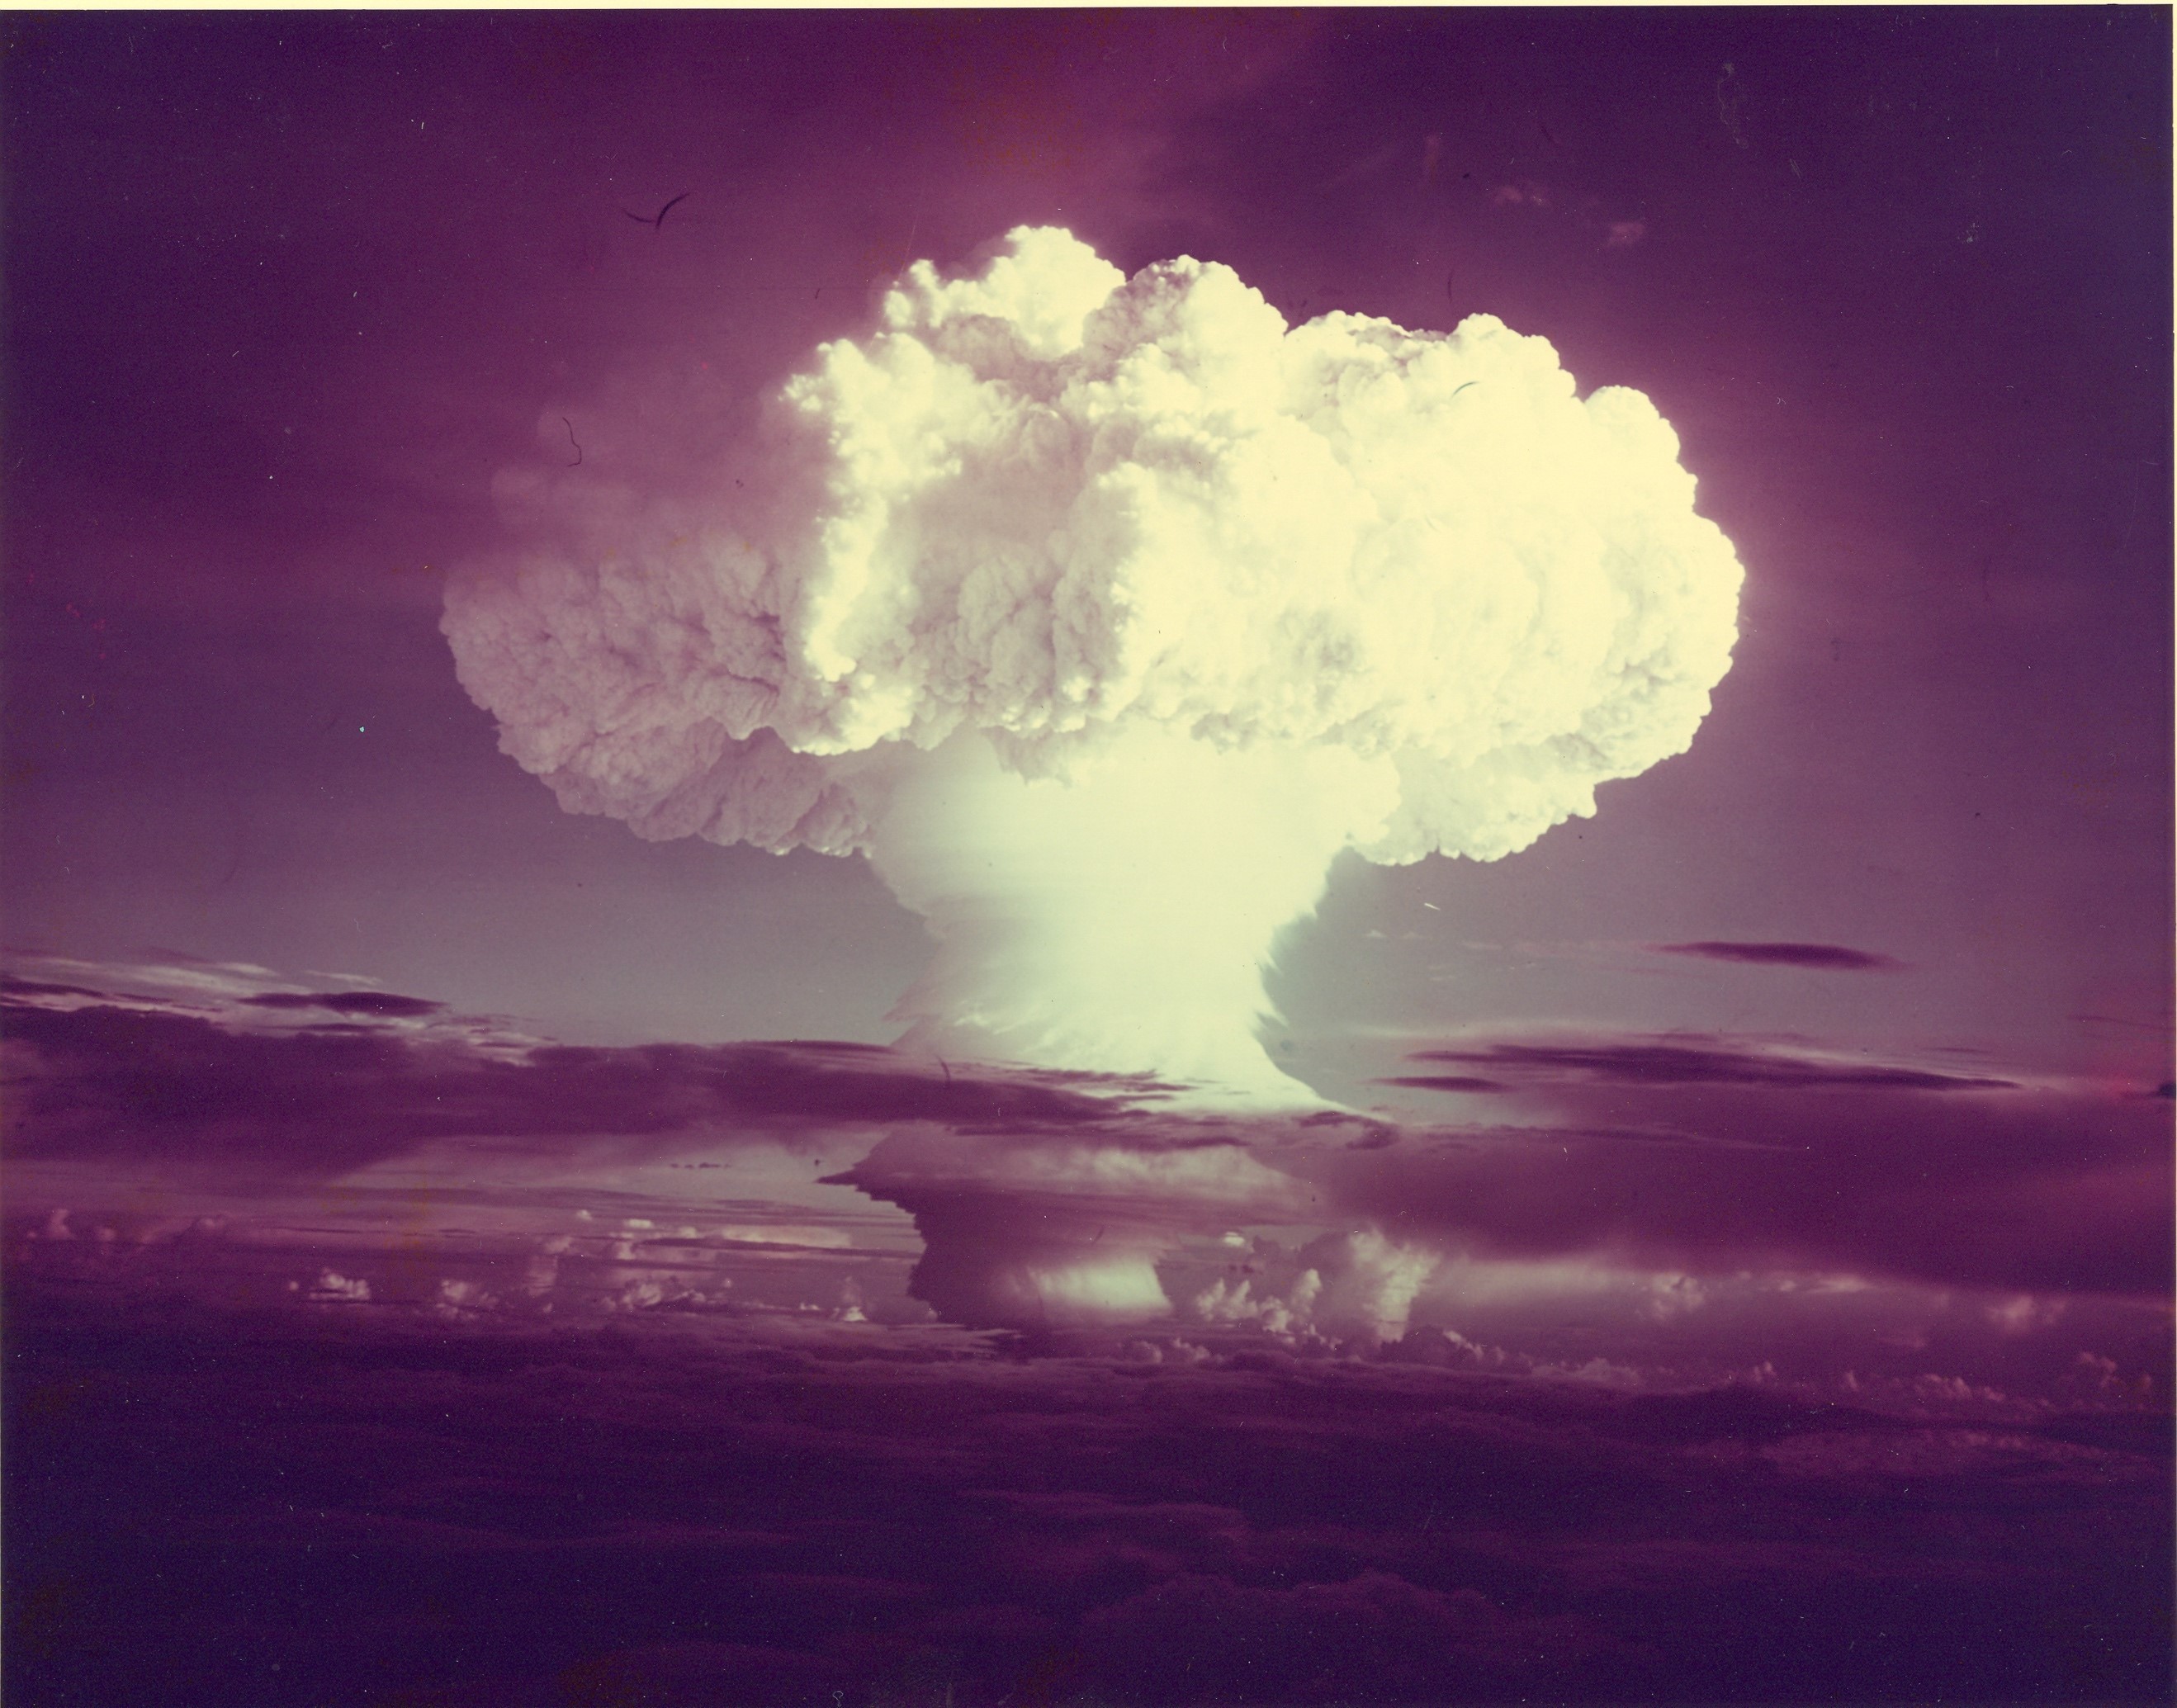 The mushroom cloud from the Ivy Mike test conducted by the U.S. in the Marshall Islands in 1952. Source: https://en.m.wikipedia.org/wiki/Ivy_Mike#/media/File%3A%22Ivy_Mike%22_atmospheric_nuclear_test_-_November_1952_-_Flickr_-_The_Official_CTBTO_Photostre